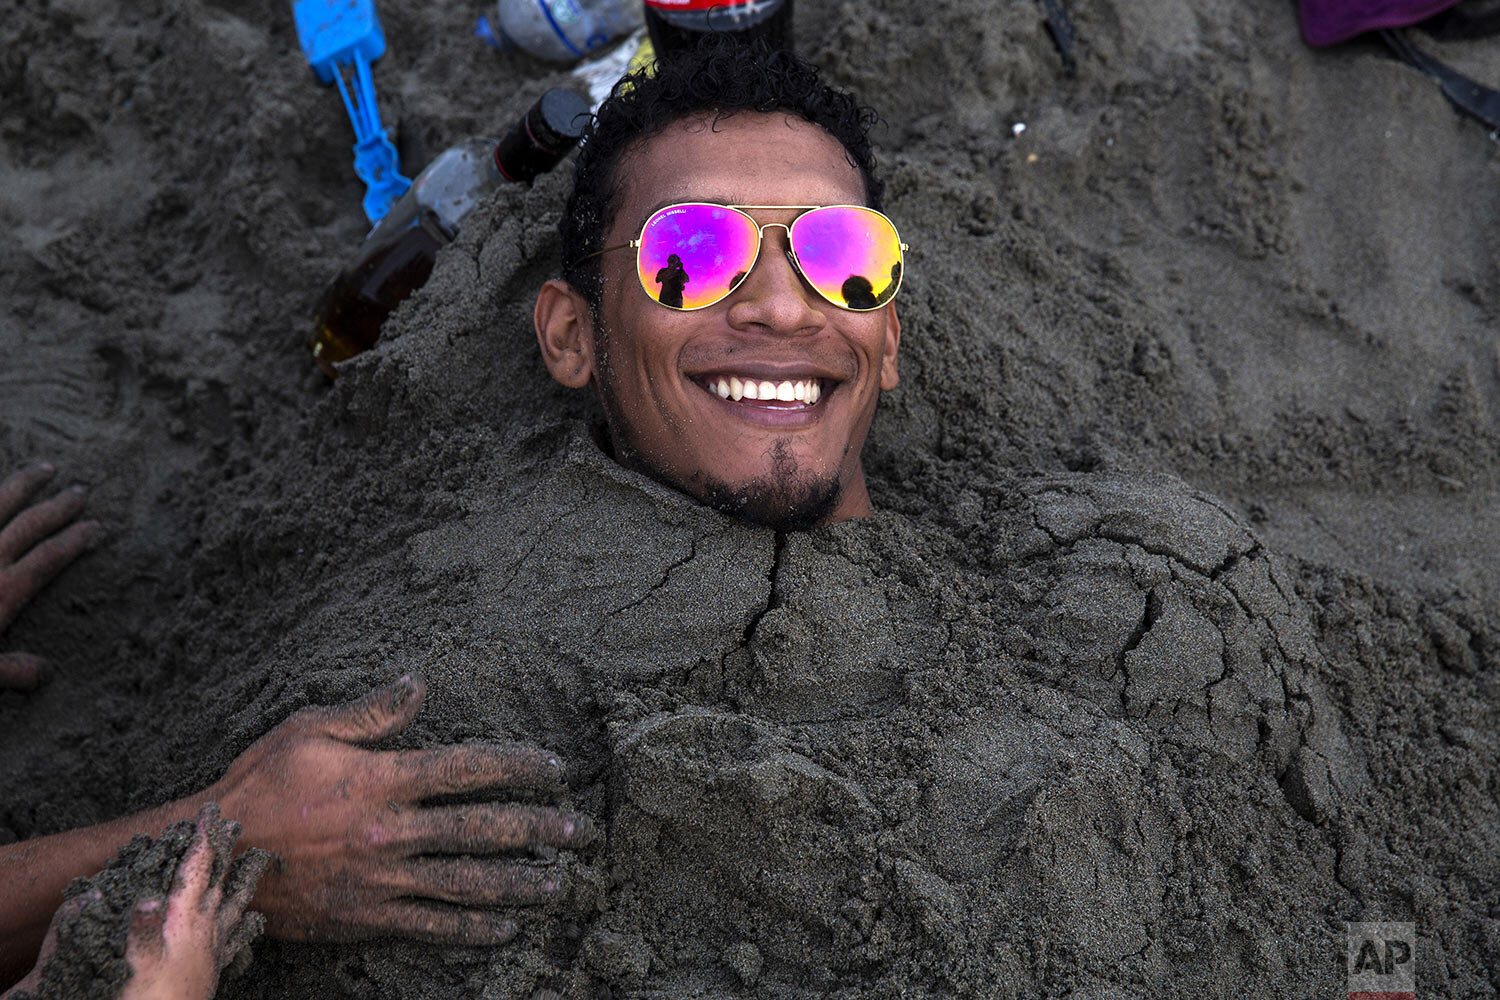  A man smiles as he buried in the sand on a day out with friends on Agua Dulce beach in Lima, Peru, Feb. 16, 2020. (AP Photo/Rodrigo Abd) 